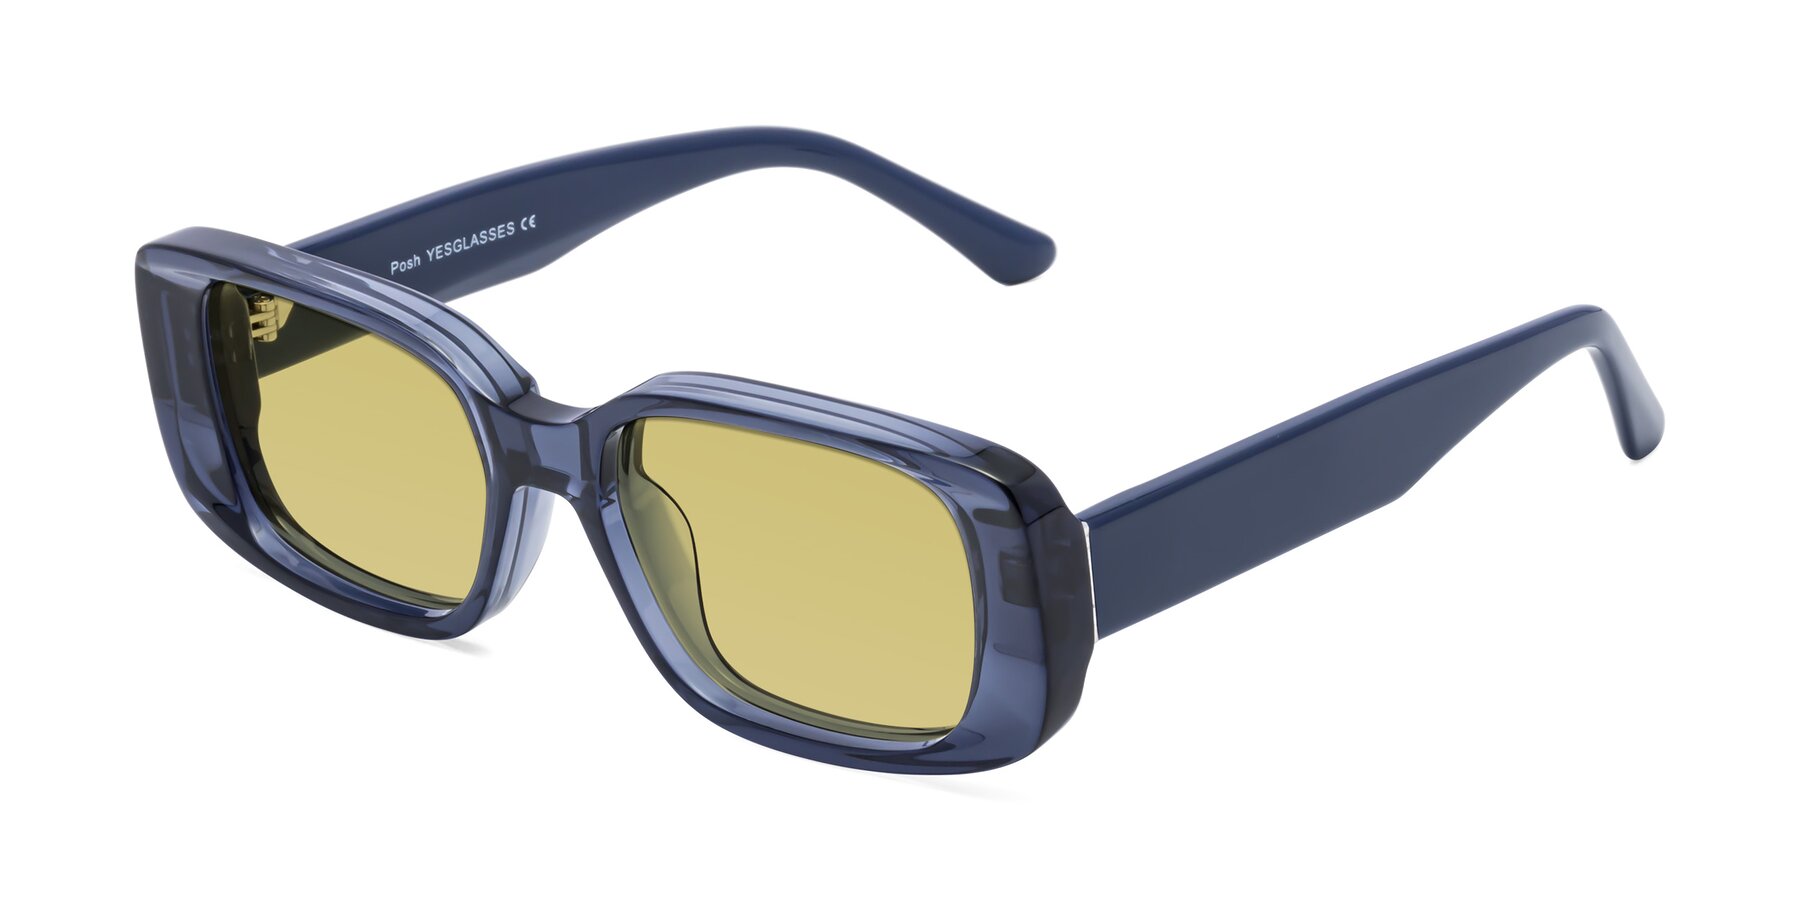 Angle of Posh in Translucent Blue with Medium Champagne Tinted Lenses